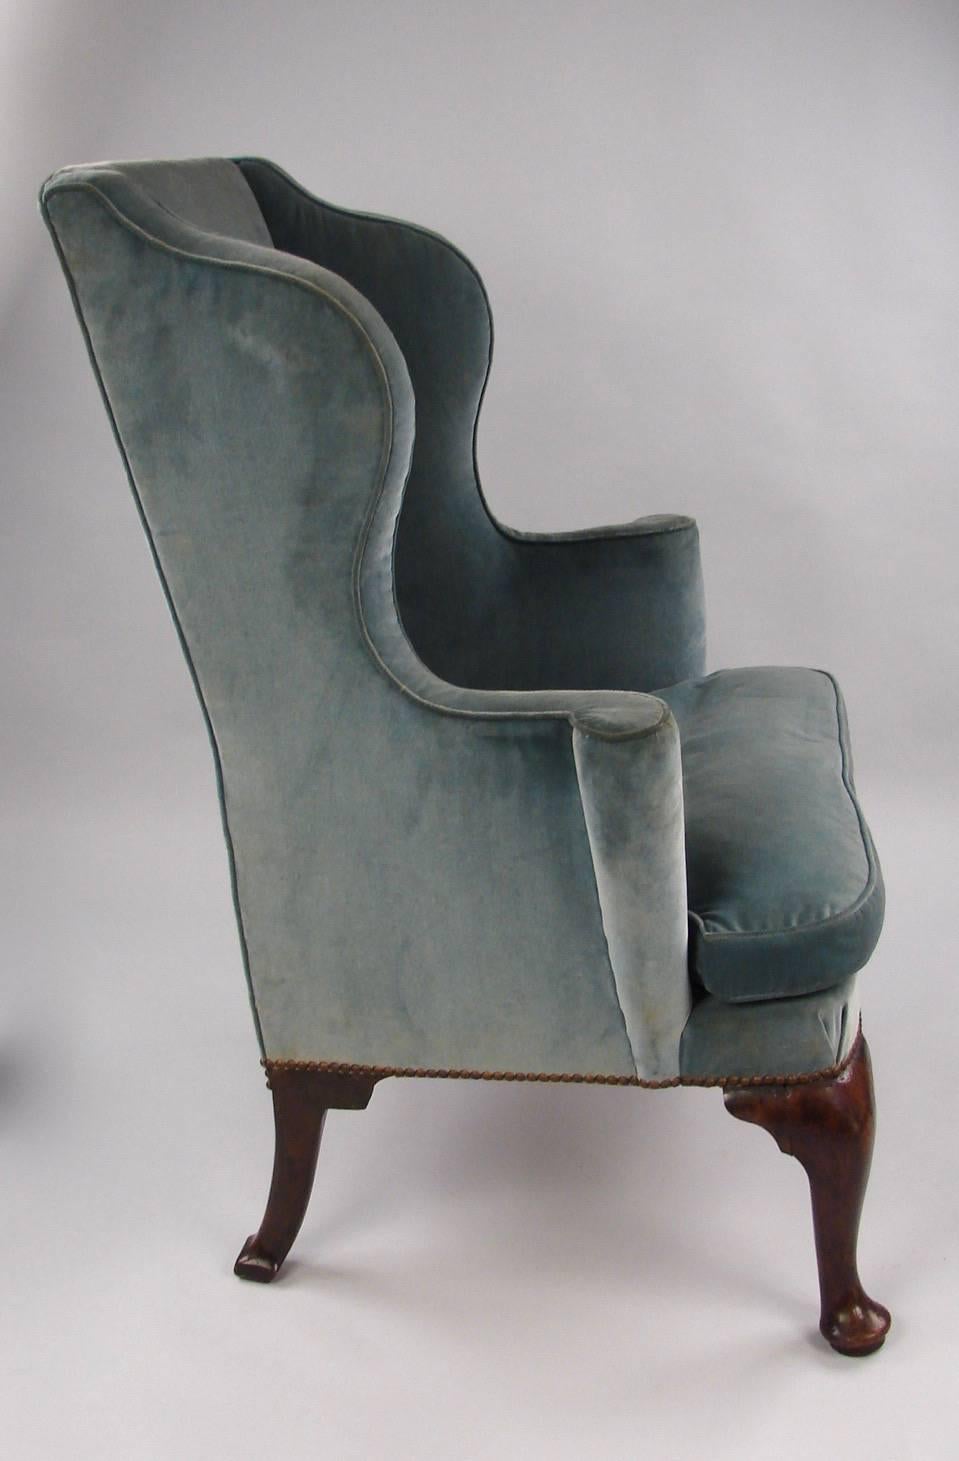 A good English George II period walnut wing armchair of elegant small size with cabriole front legs and canted rear legs, now upholstered in blue velvet with a cushion seat, circa 1750.